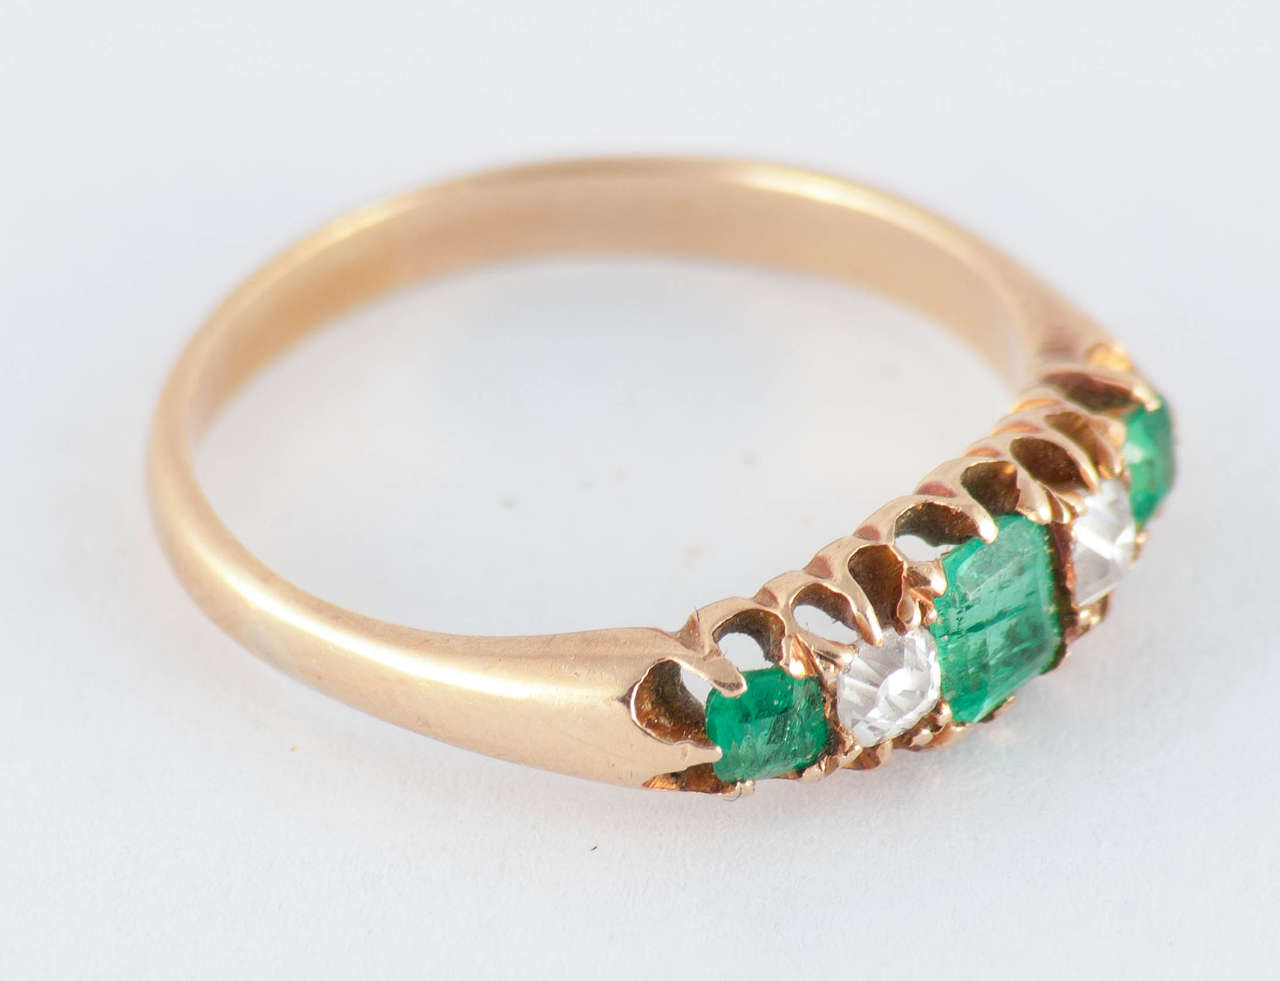 Edwardian five stone ring of three emeralds and 2 diamonds set in 15K gold. Wonderful to wear alone or stack with other rings. This ring is a size 7 1/4.